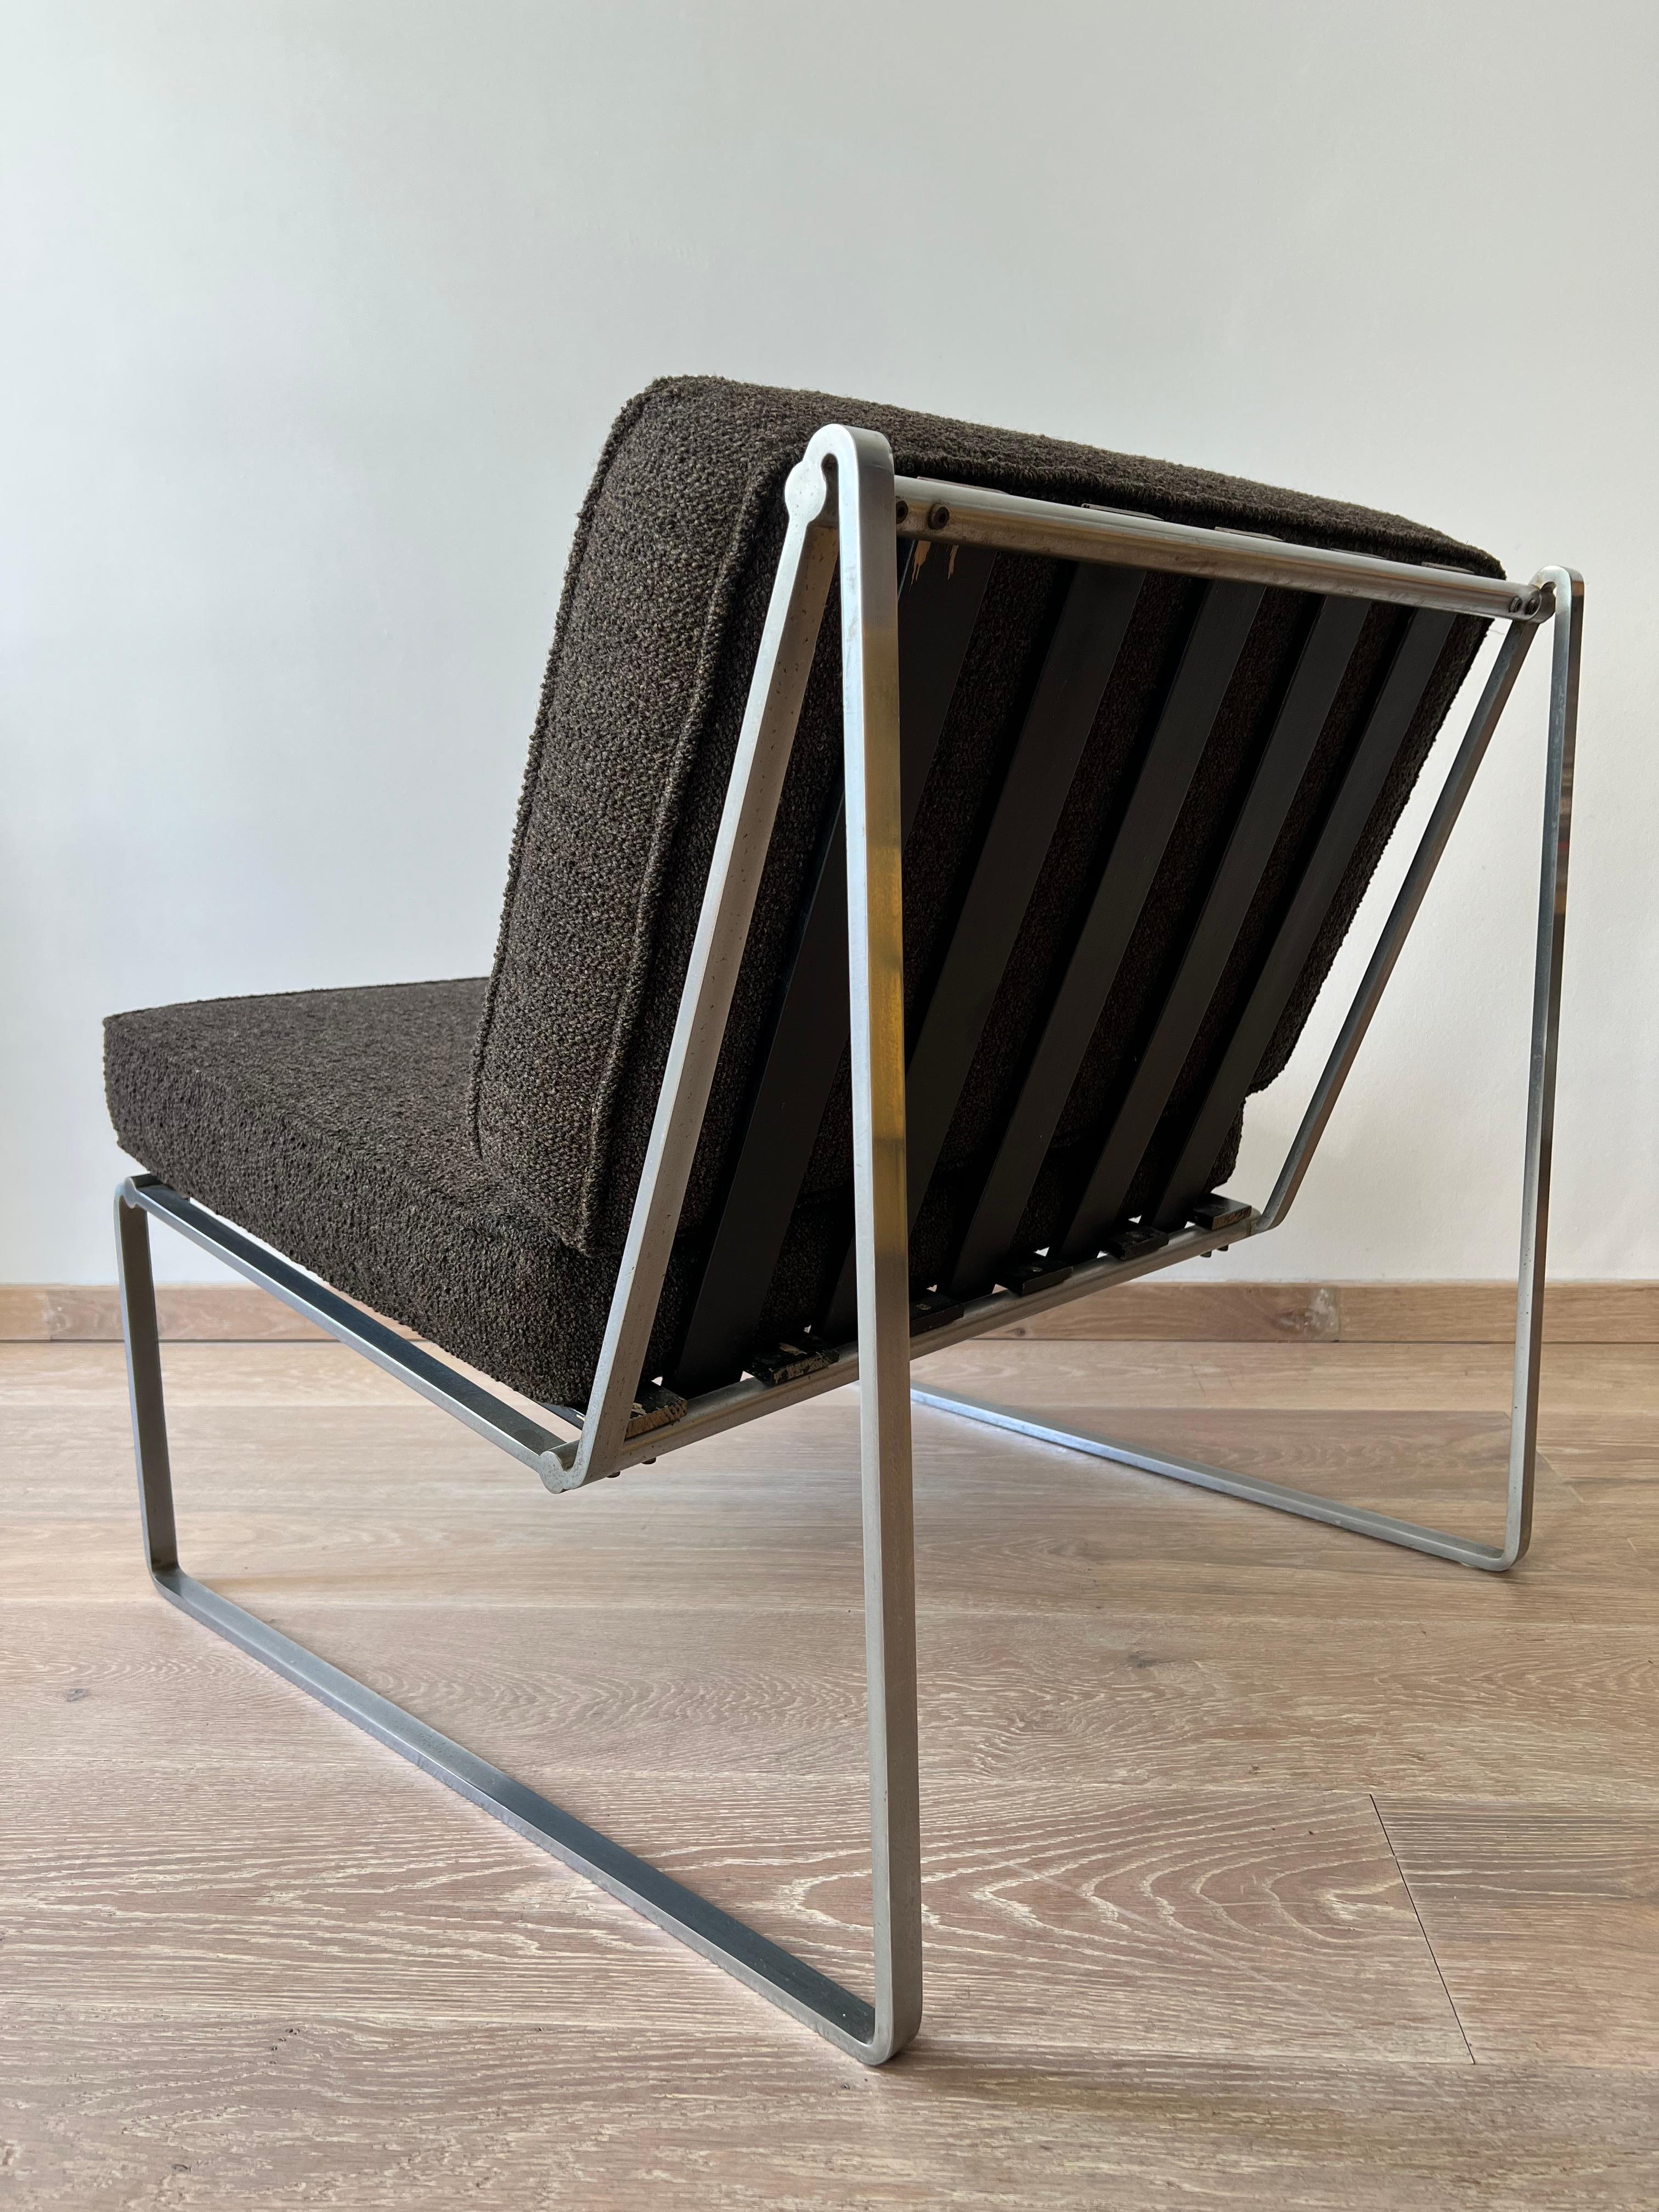 Dutch Midcentury Lounge Chair 024 by Kho Liang Ie for Artifort, Netherlands